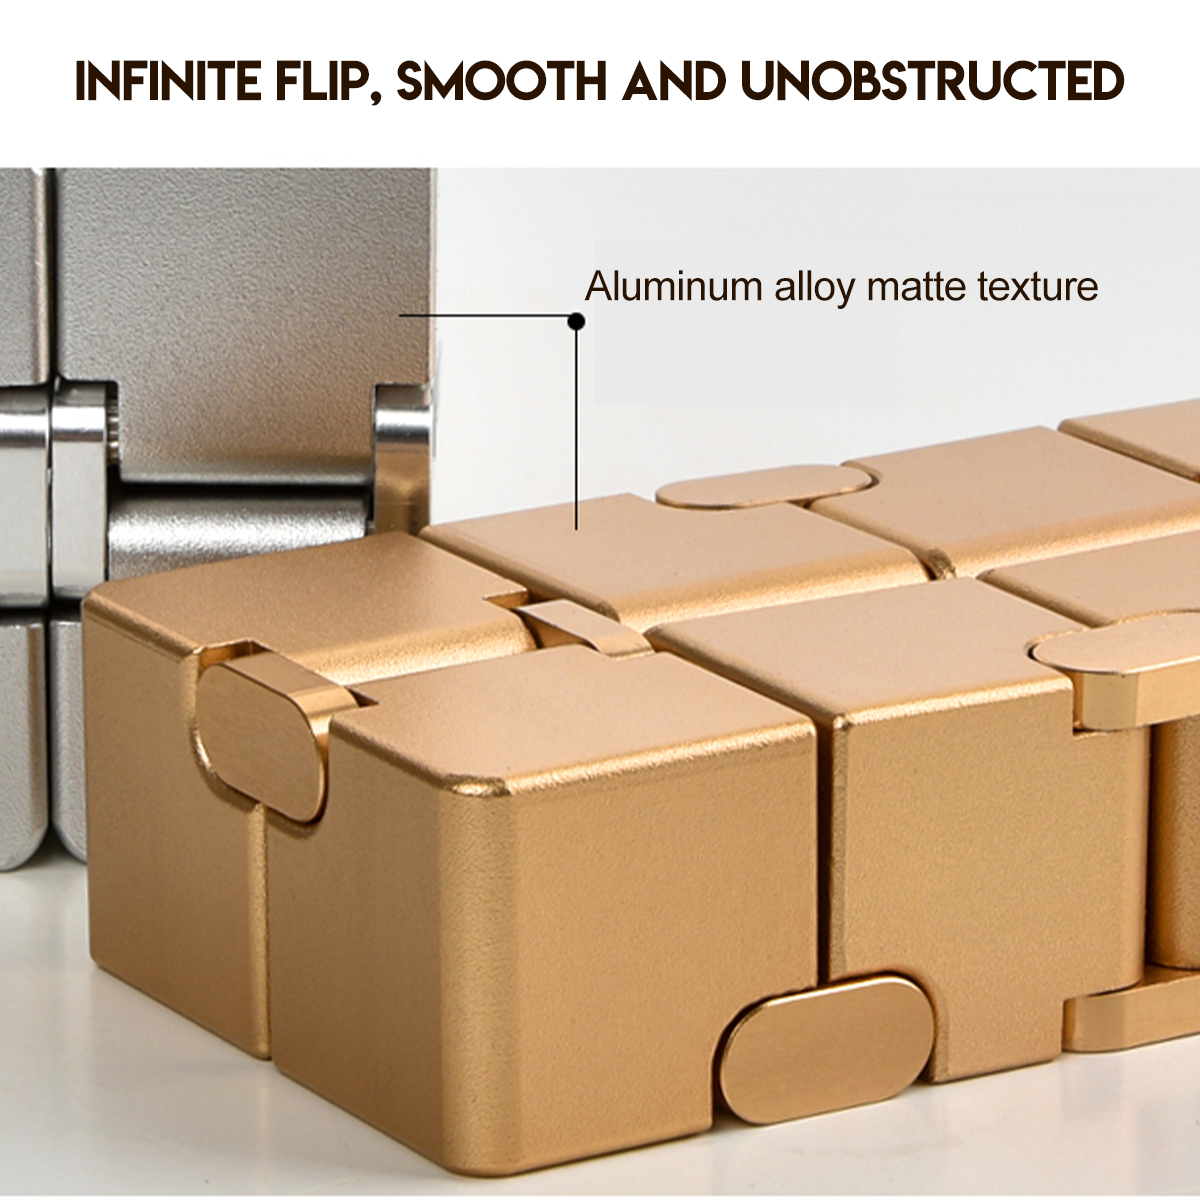 Mini-Infinity-Funny-Magic-Cube-Aluminum-Alloy-Anxiety-Stress-Relief-Blocks-Toy-for-Kids-Adult-1541126-6